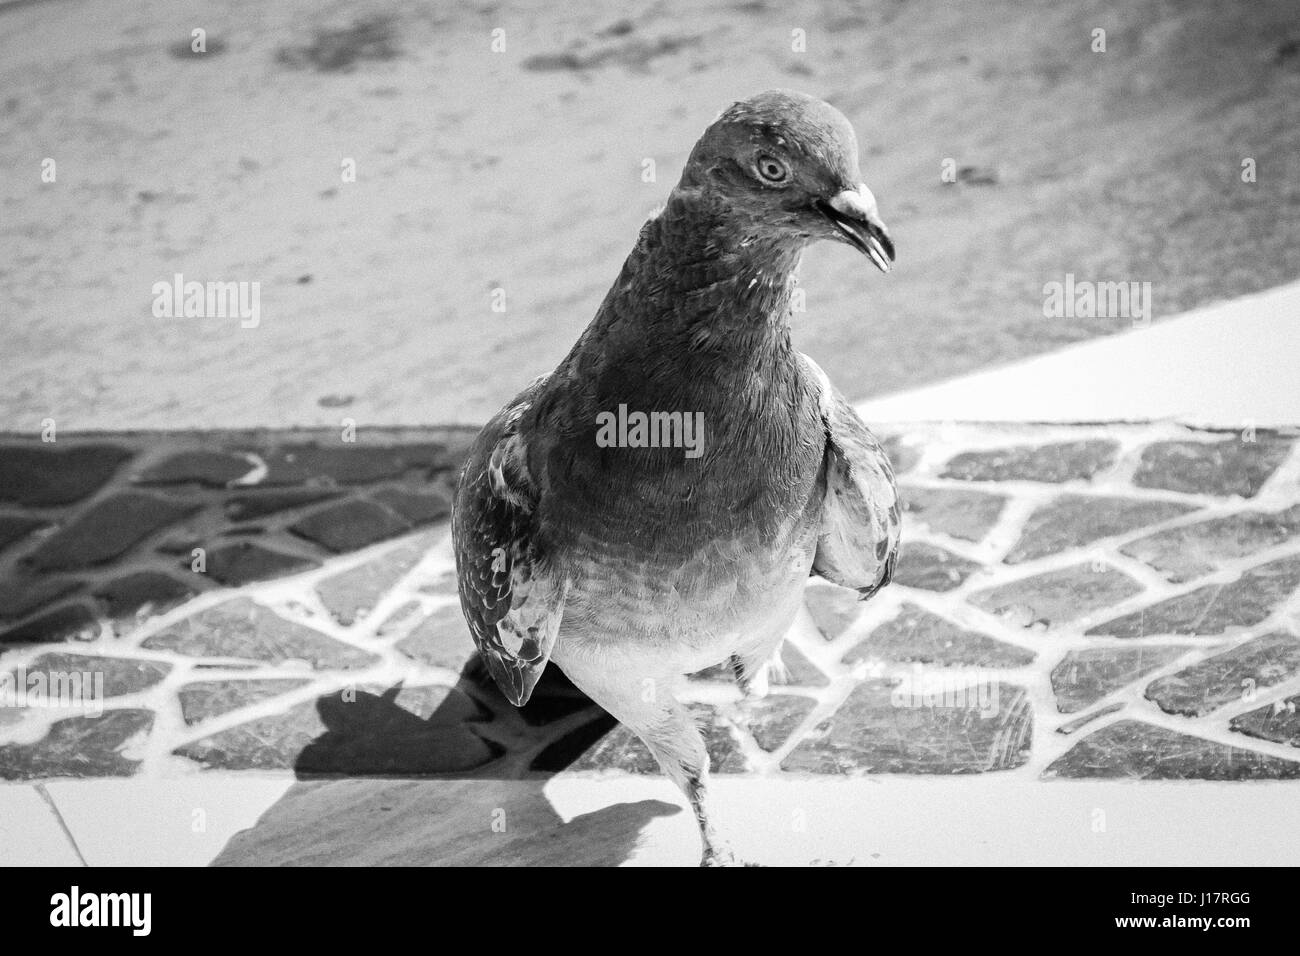 Black and white photograph shows off the character of a bold, one-legged pigeon on a city street in Mexico. Stock Photo